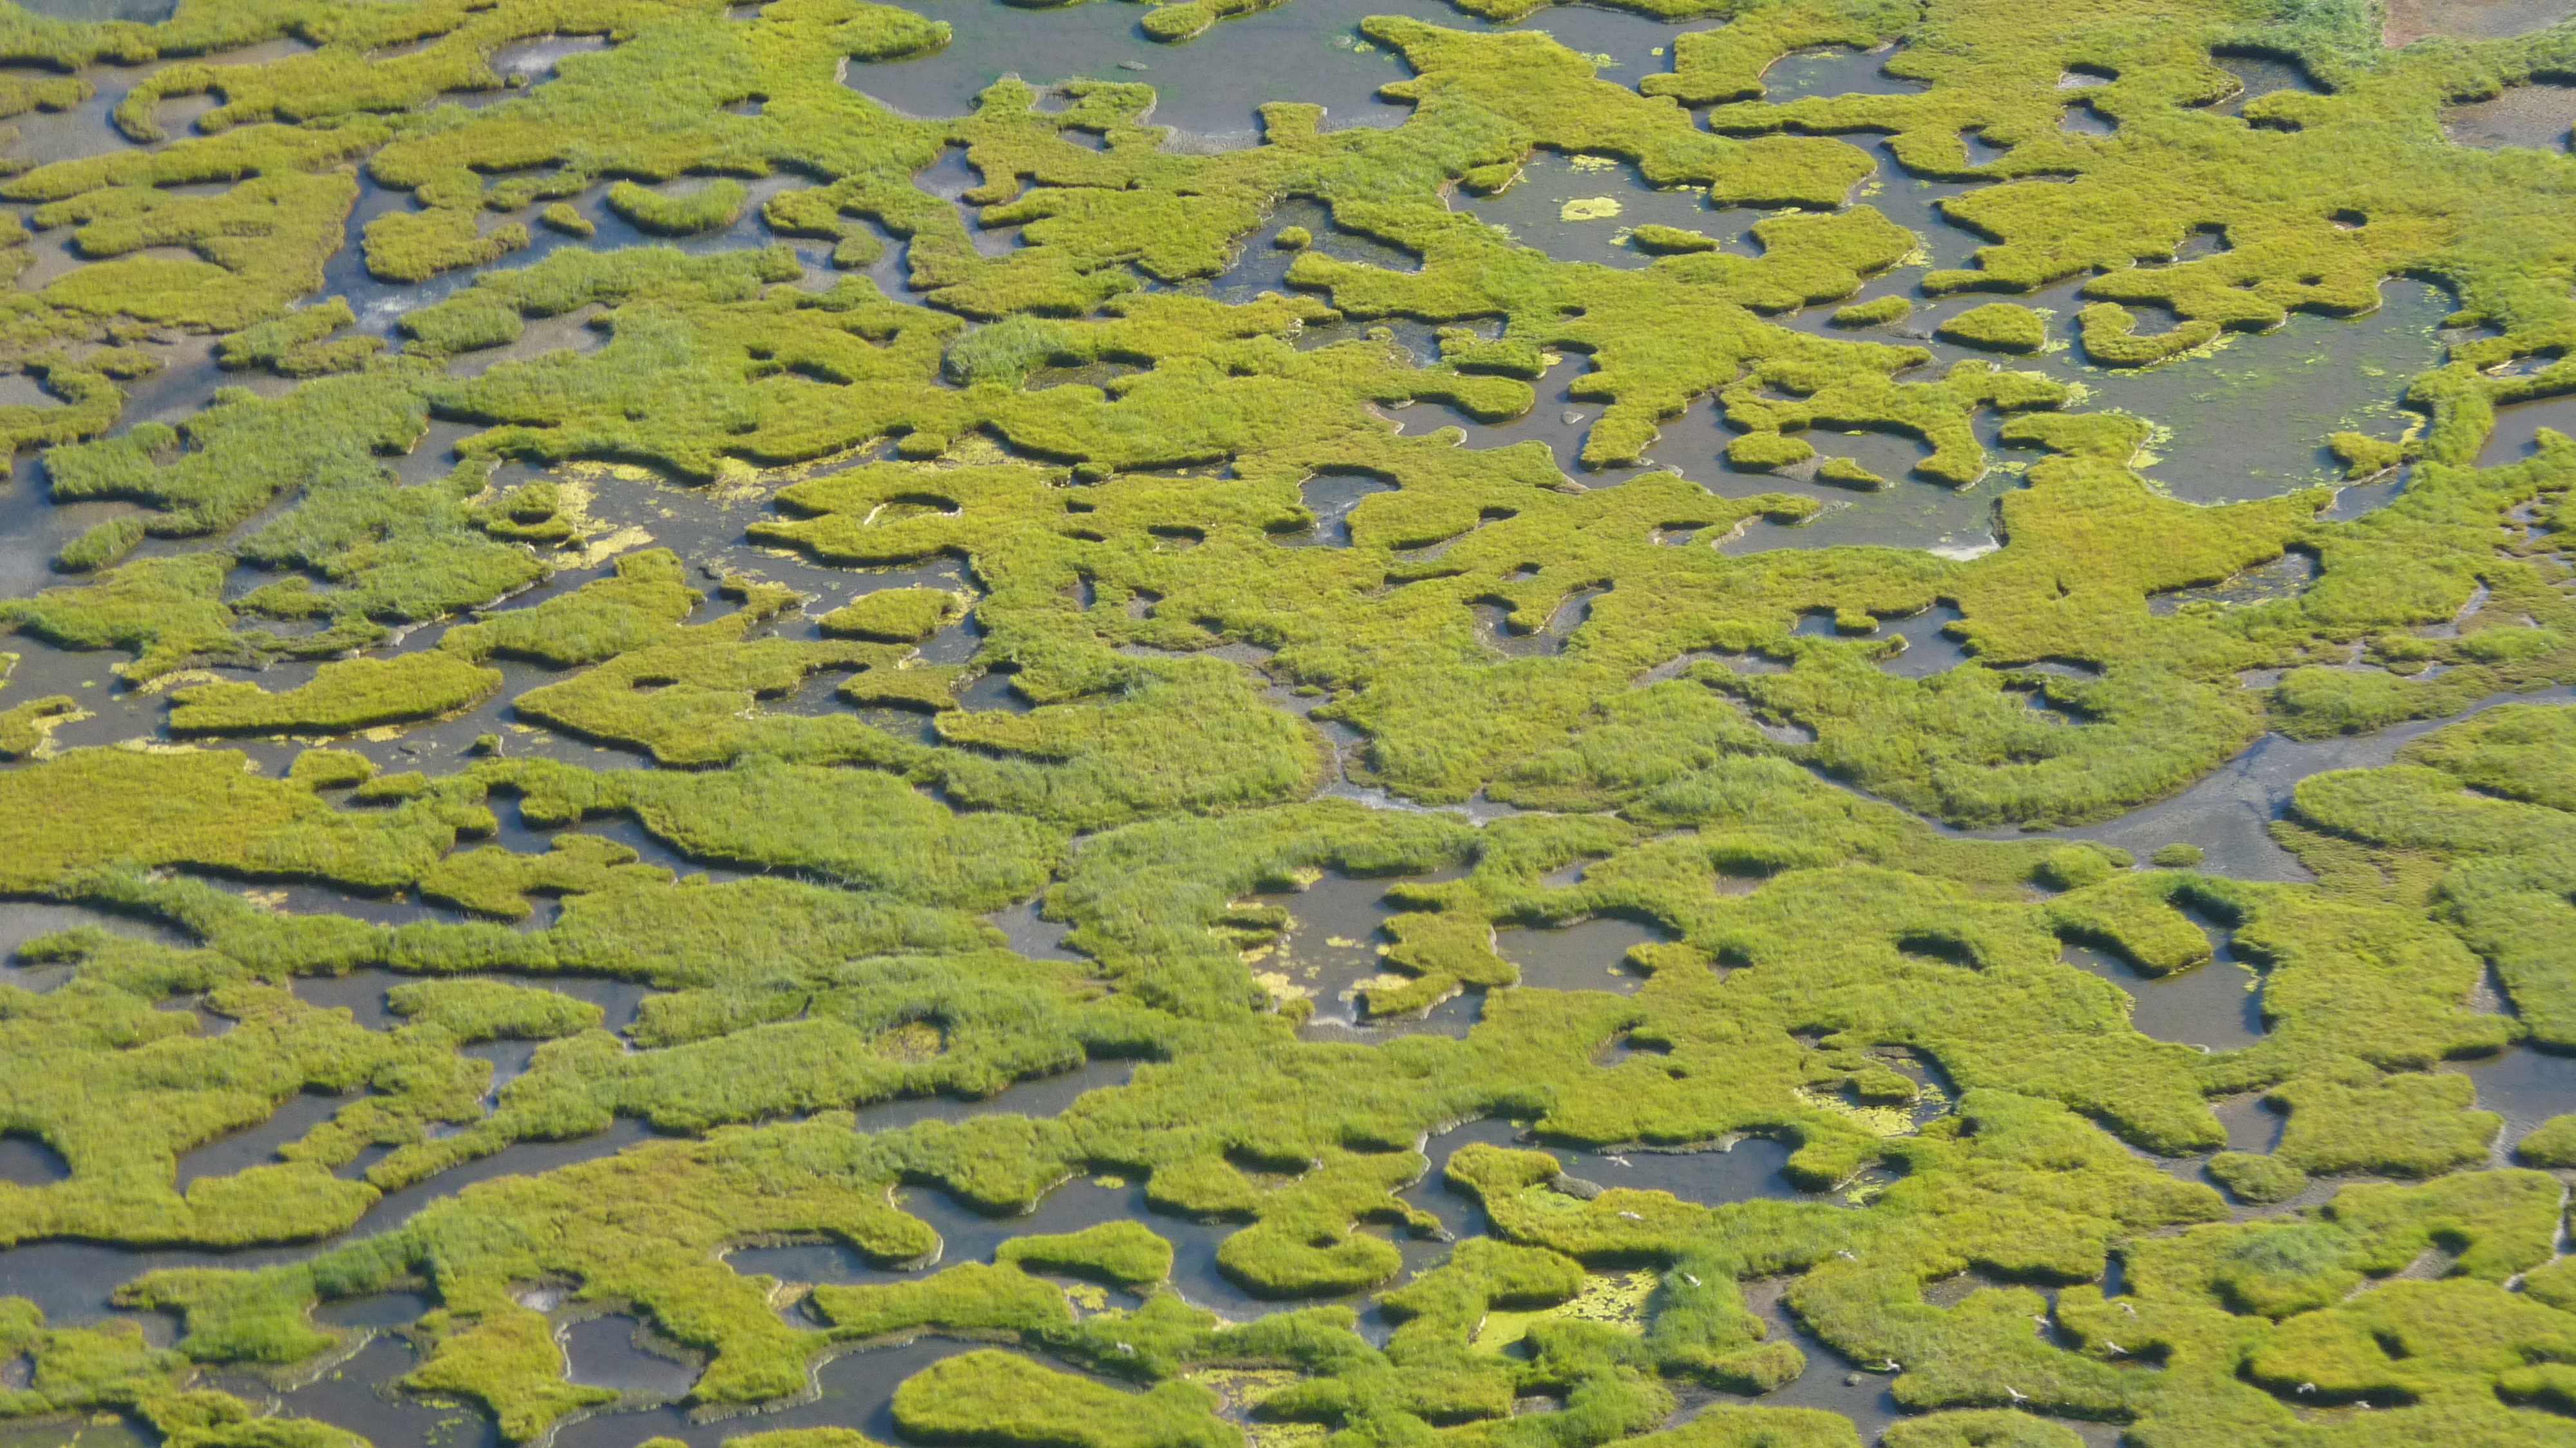 From above, a labyrinth of grass creeps through a shallow body of water.